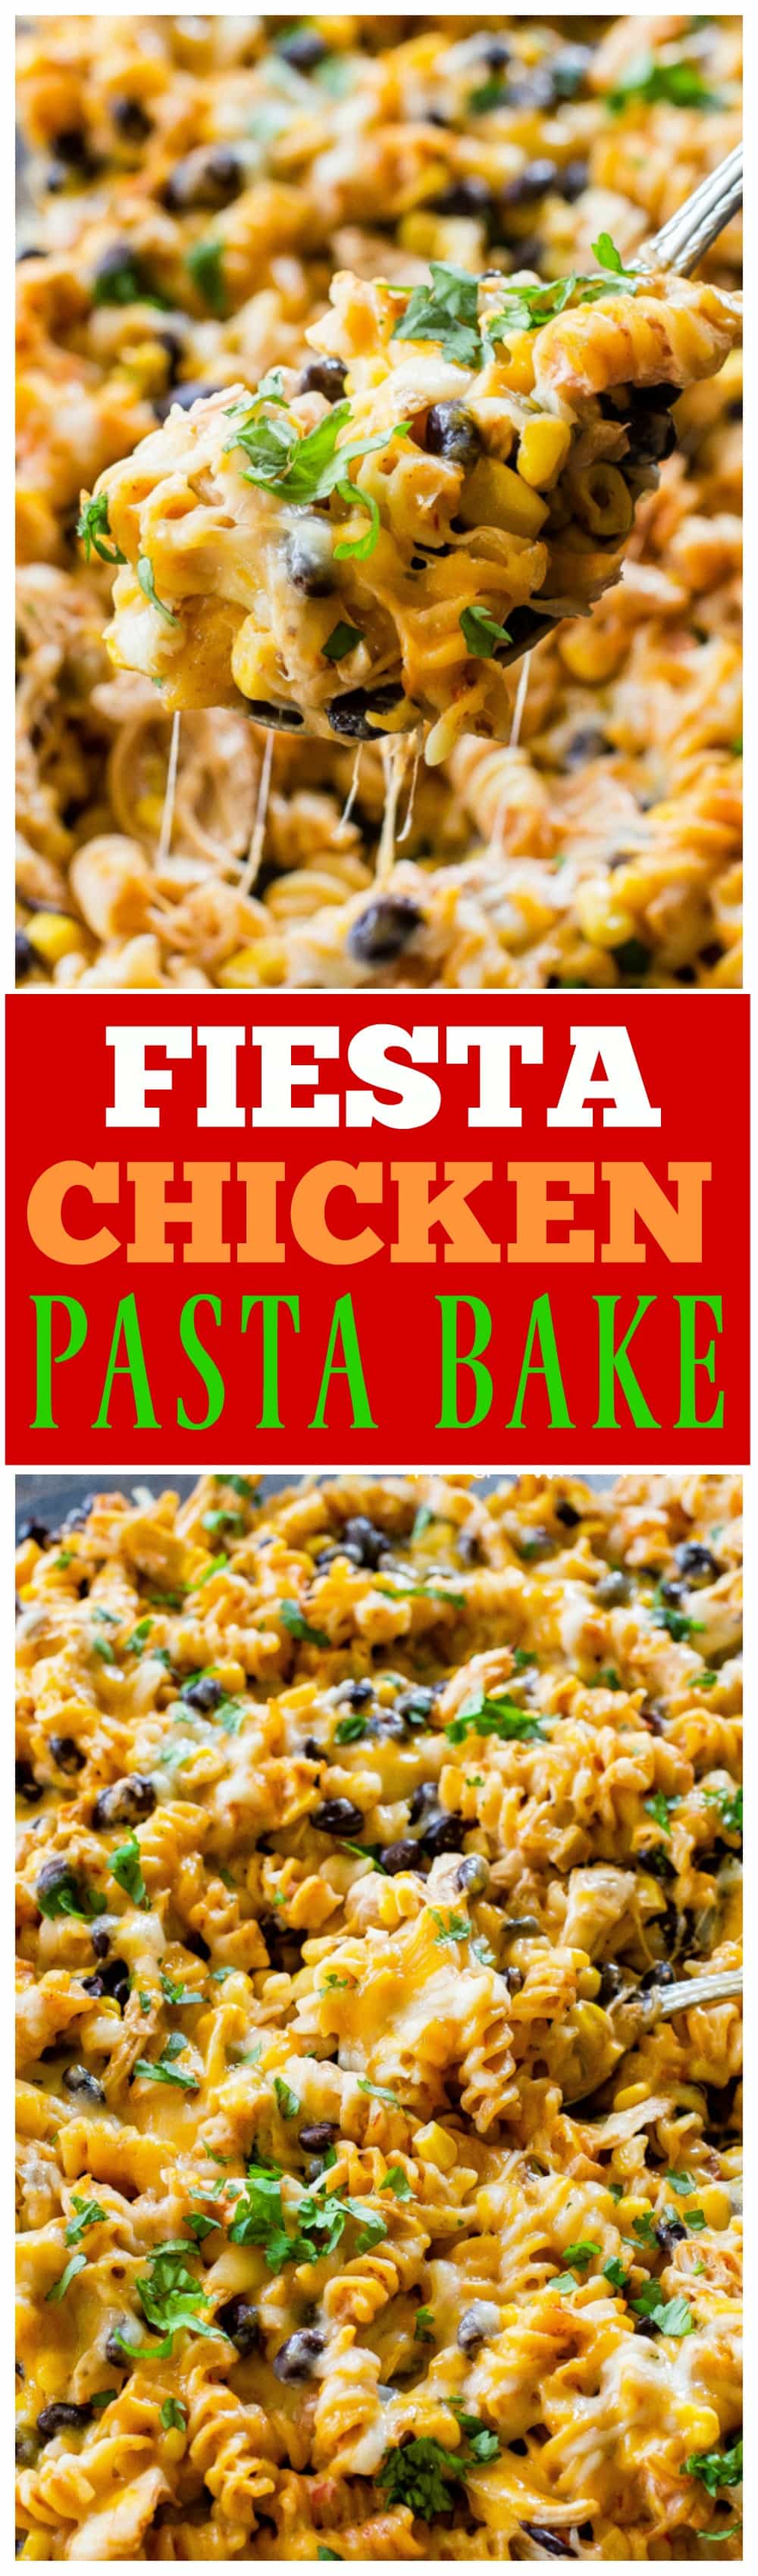 Fiesta Chicken Pasta Bake - creamy, spicy, cheesy...your family will love this easy Mexican dinner. #chicken #pasta #dinner #mexican #recipe